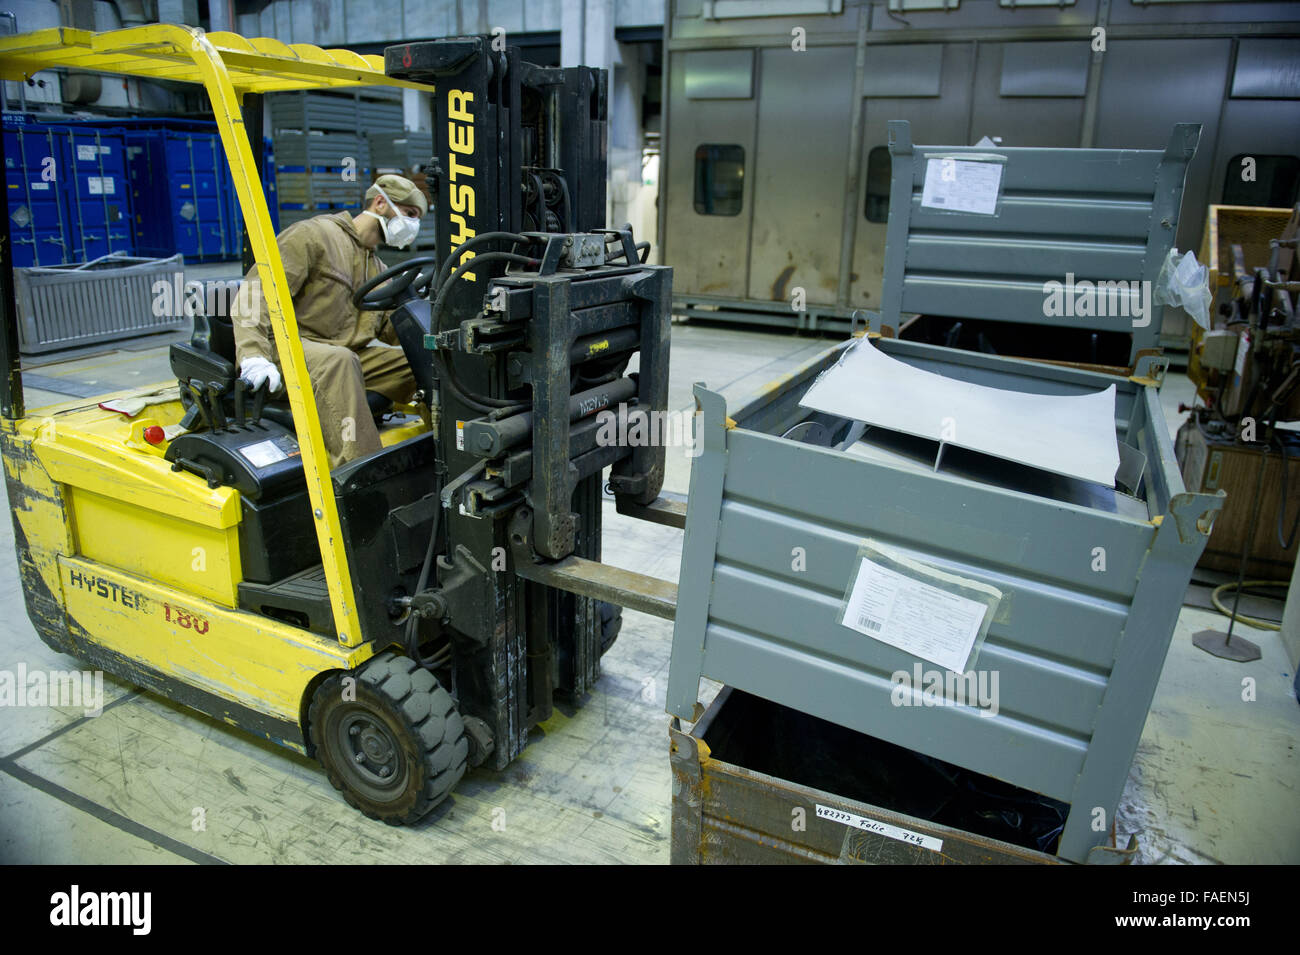 Lubmin, Germany. 16th Dec, 2015. An employee of Energiewerke Nord GmbH (EWN) uses a forklifter to move cleaned components of the former Bruno Leuschner nuclear power plant, in the conditioning and decontamination facility in Lubmin, Germany, 16 December 2015. The federally owned company Energiewerke Nord (EWN) will expedite the dismantling of the nuclear power plants decommissioned in 1990 located in Lubmin and Rheinsberg respectively. Photo: STEFAN SAUER/dpa/Alamy Live News Stock Photo